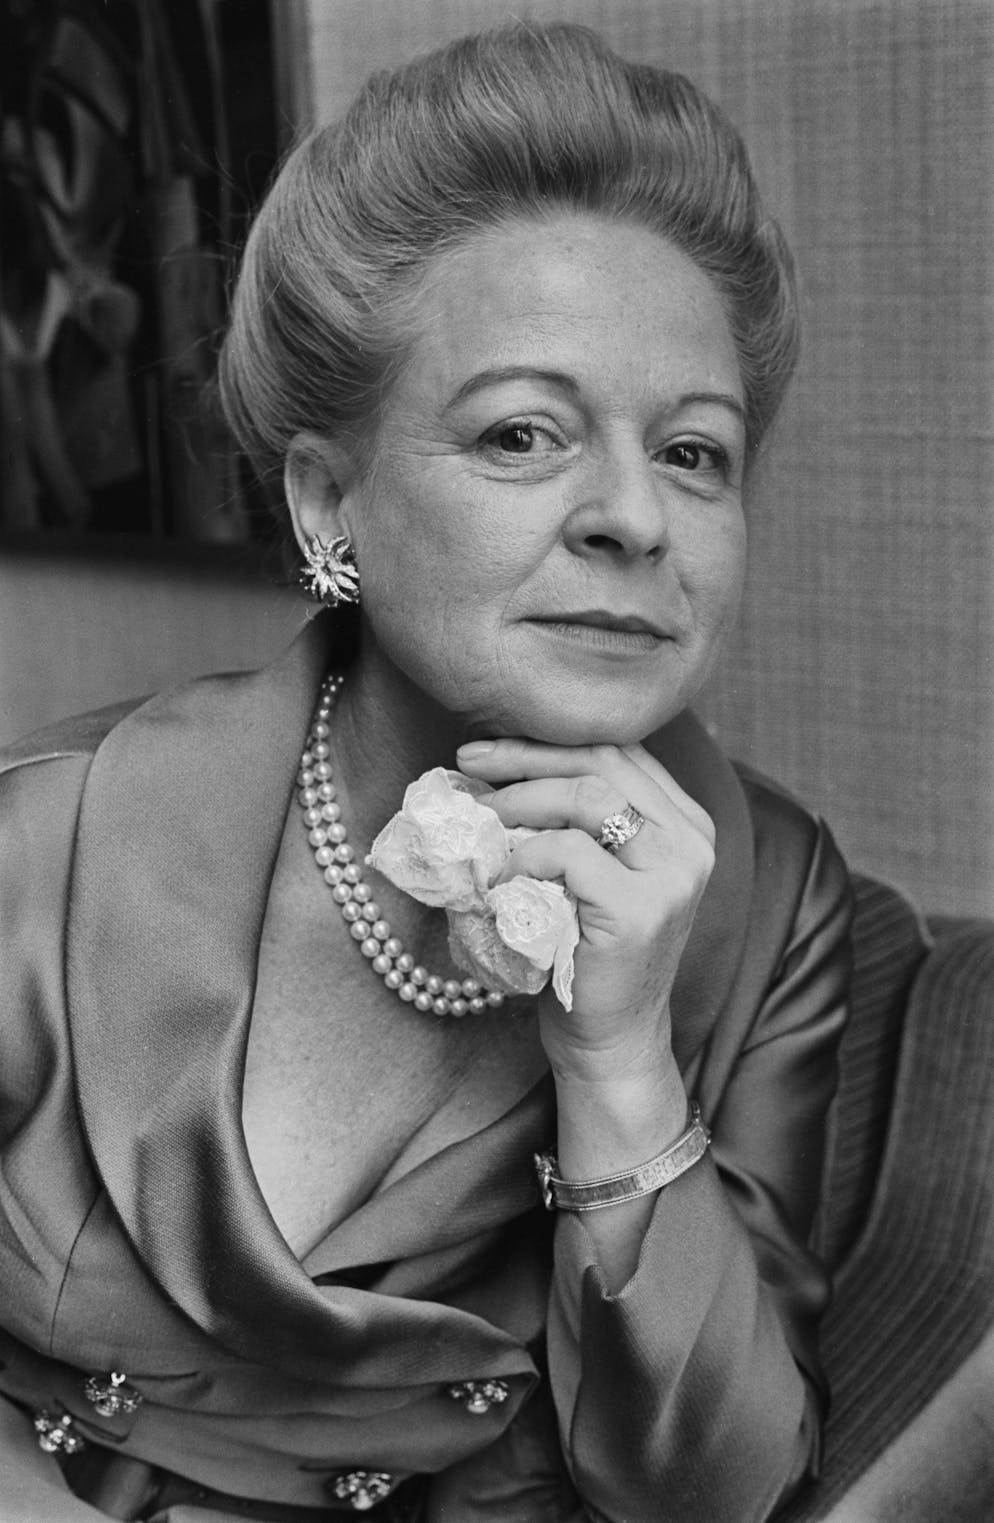 Martha Mitchell (1918 - 1976), the wife of US Attorney General John N Mitchell, July 1971. (Photo by Evening Standard/Hulton Archive/Getty Images)